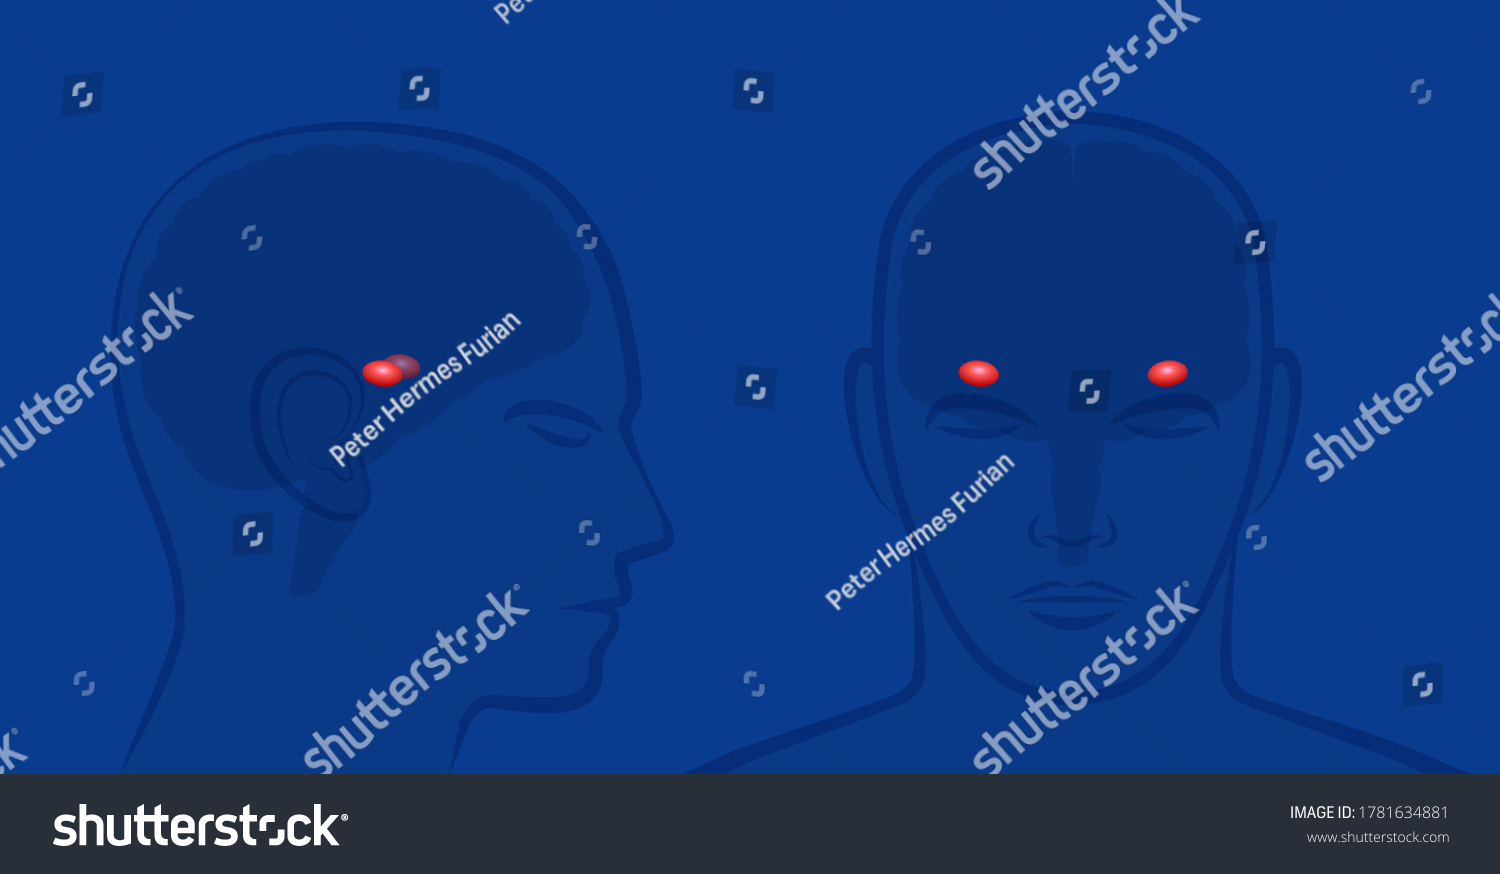 SVG of Amygdalas in a human brain. Lateral and frontal view with position of amygdalae. Vector illustration on blue background.
 svg